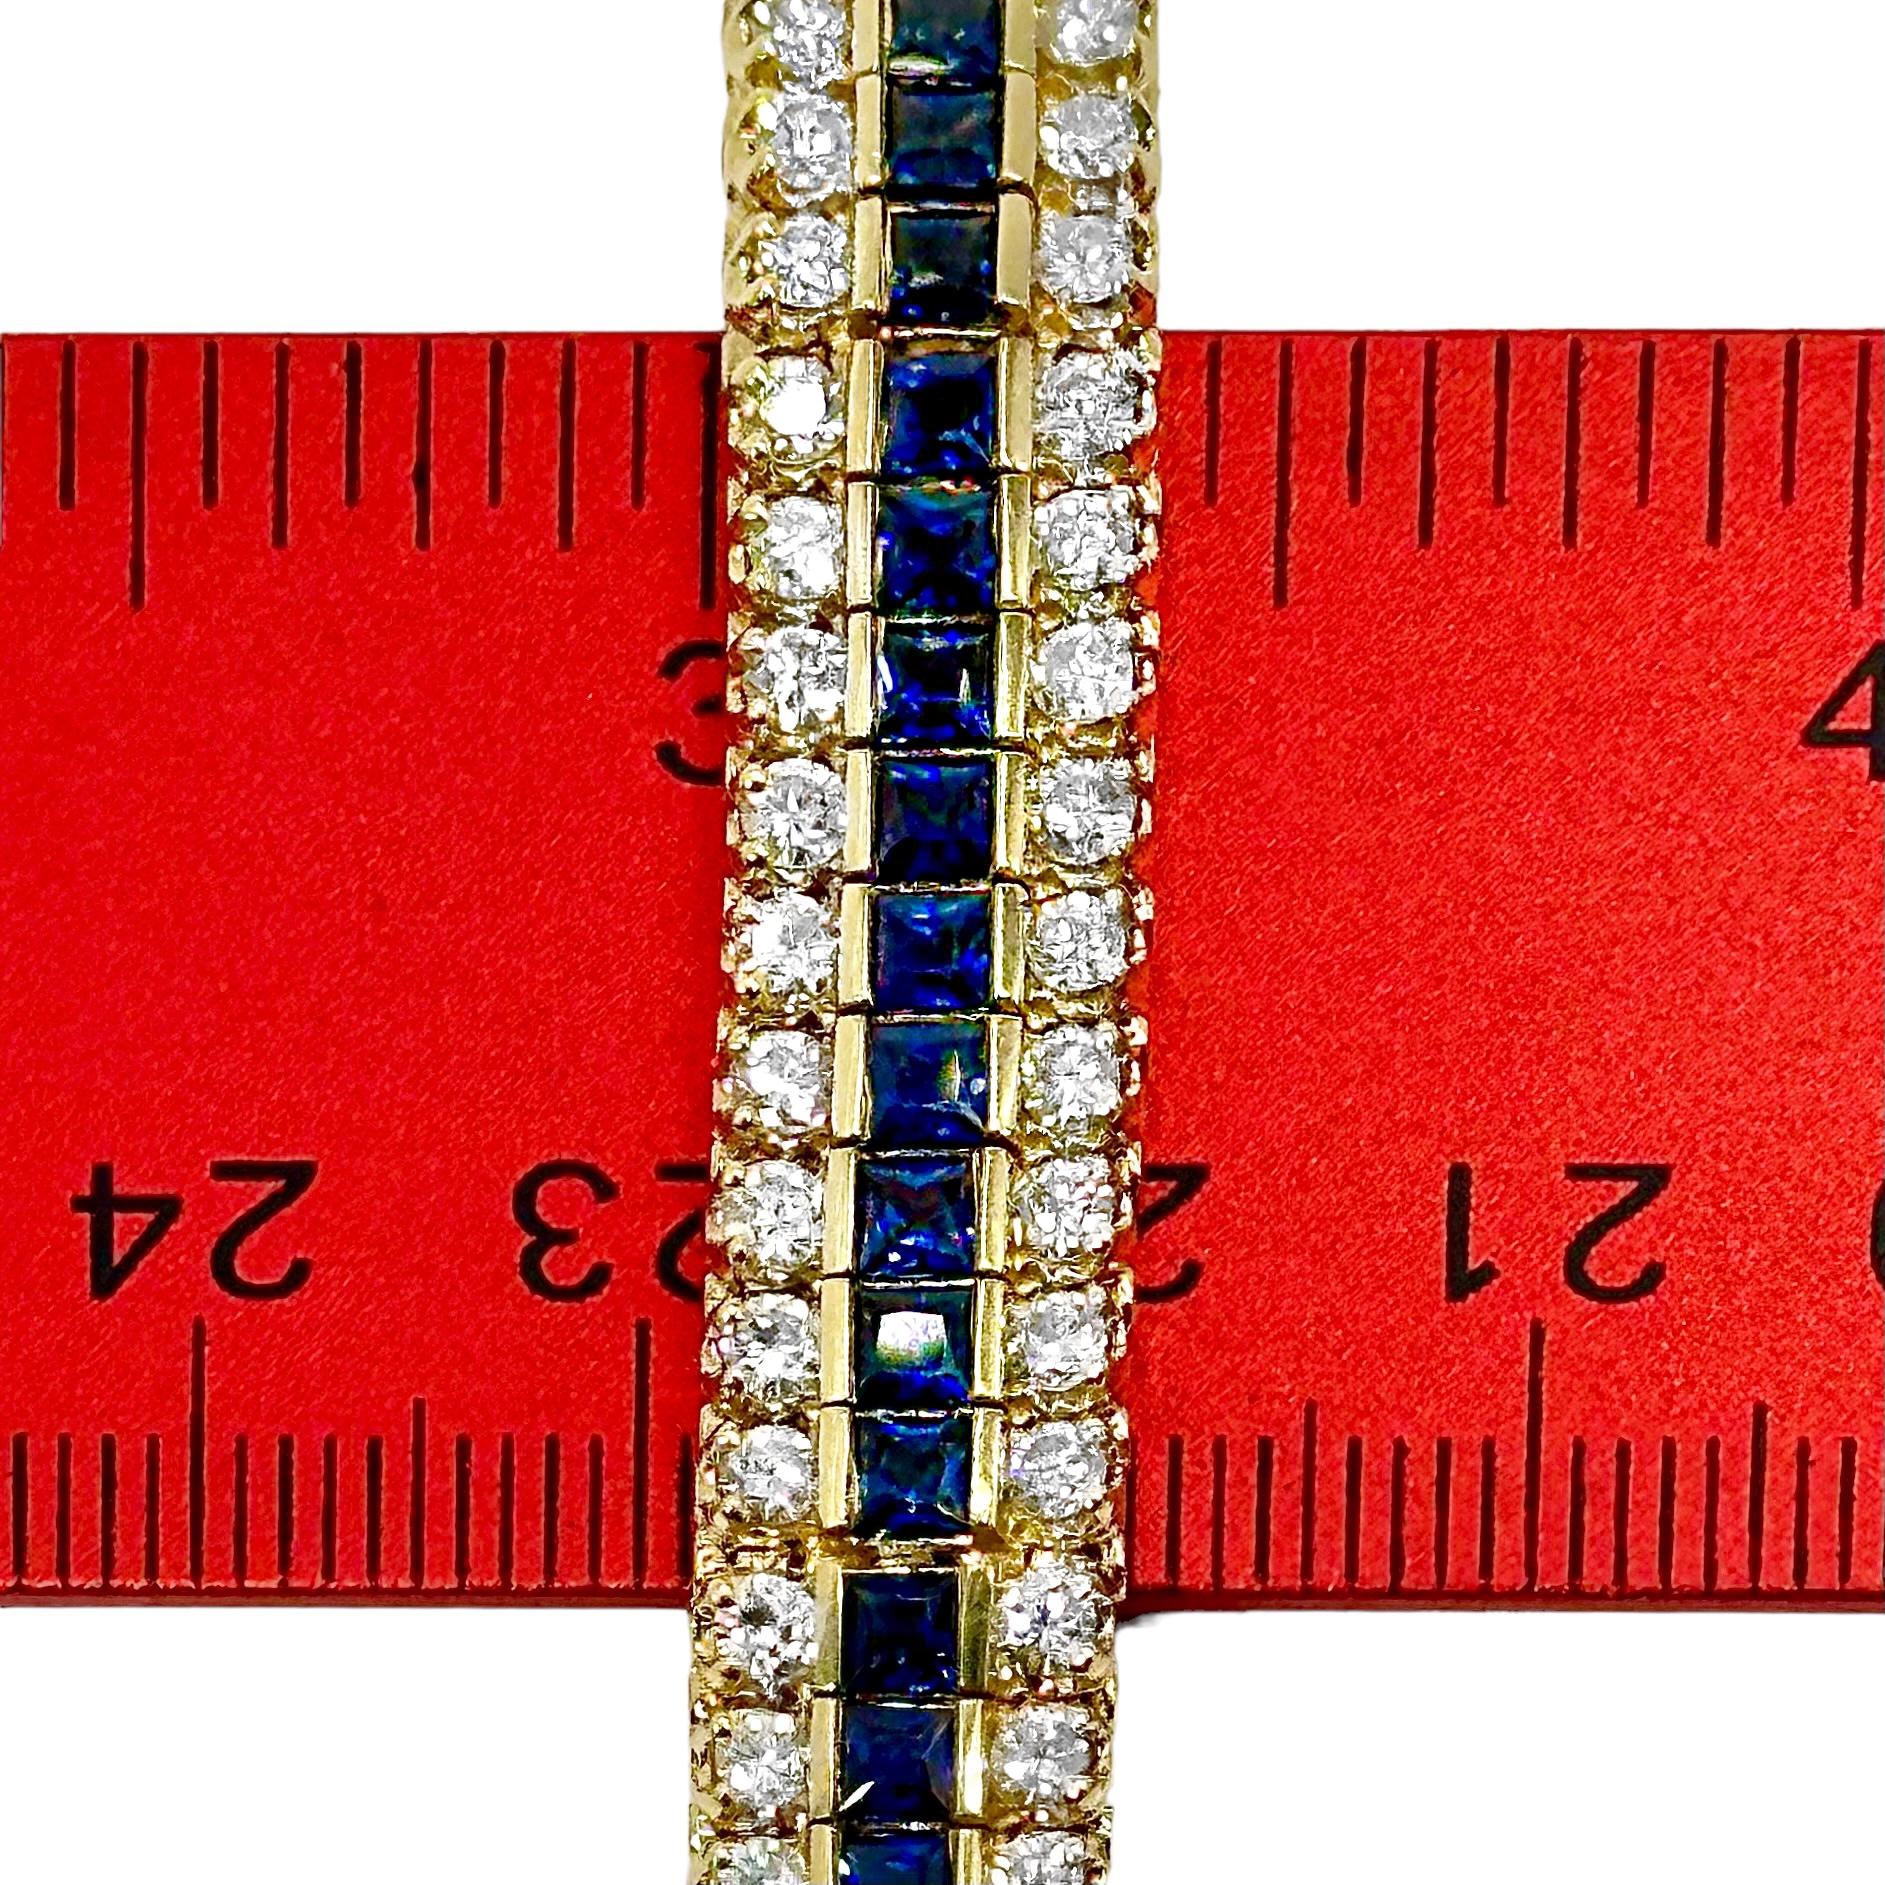 3 Row Gold Tennis Bracelet With 2 Diamond Rows Surrounding 1 Row of Sapphires For Sale 1